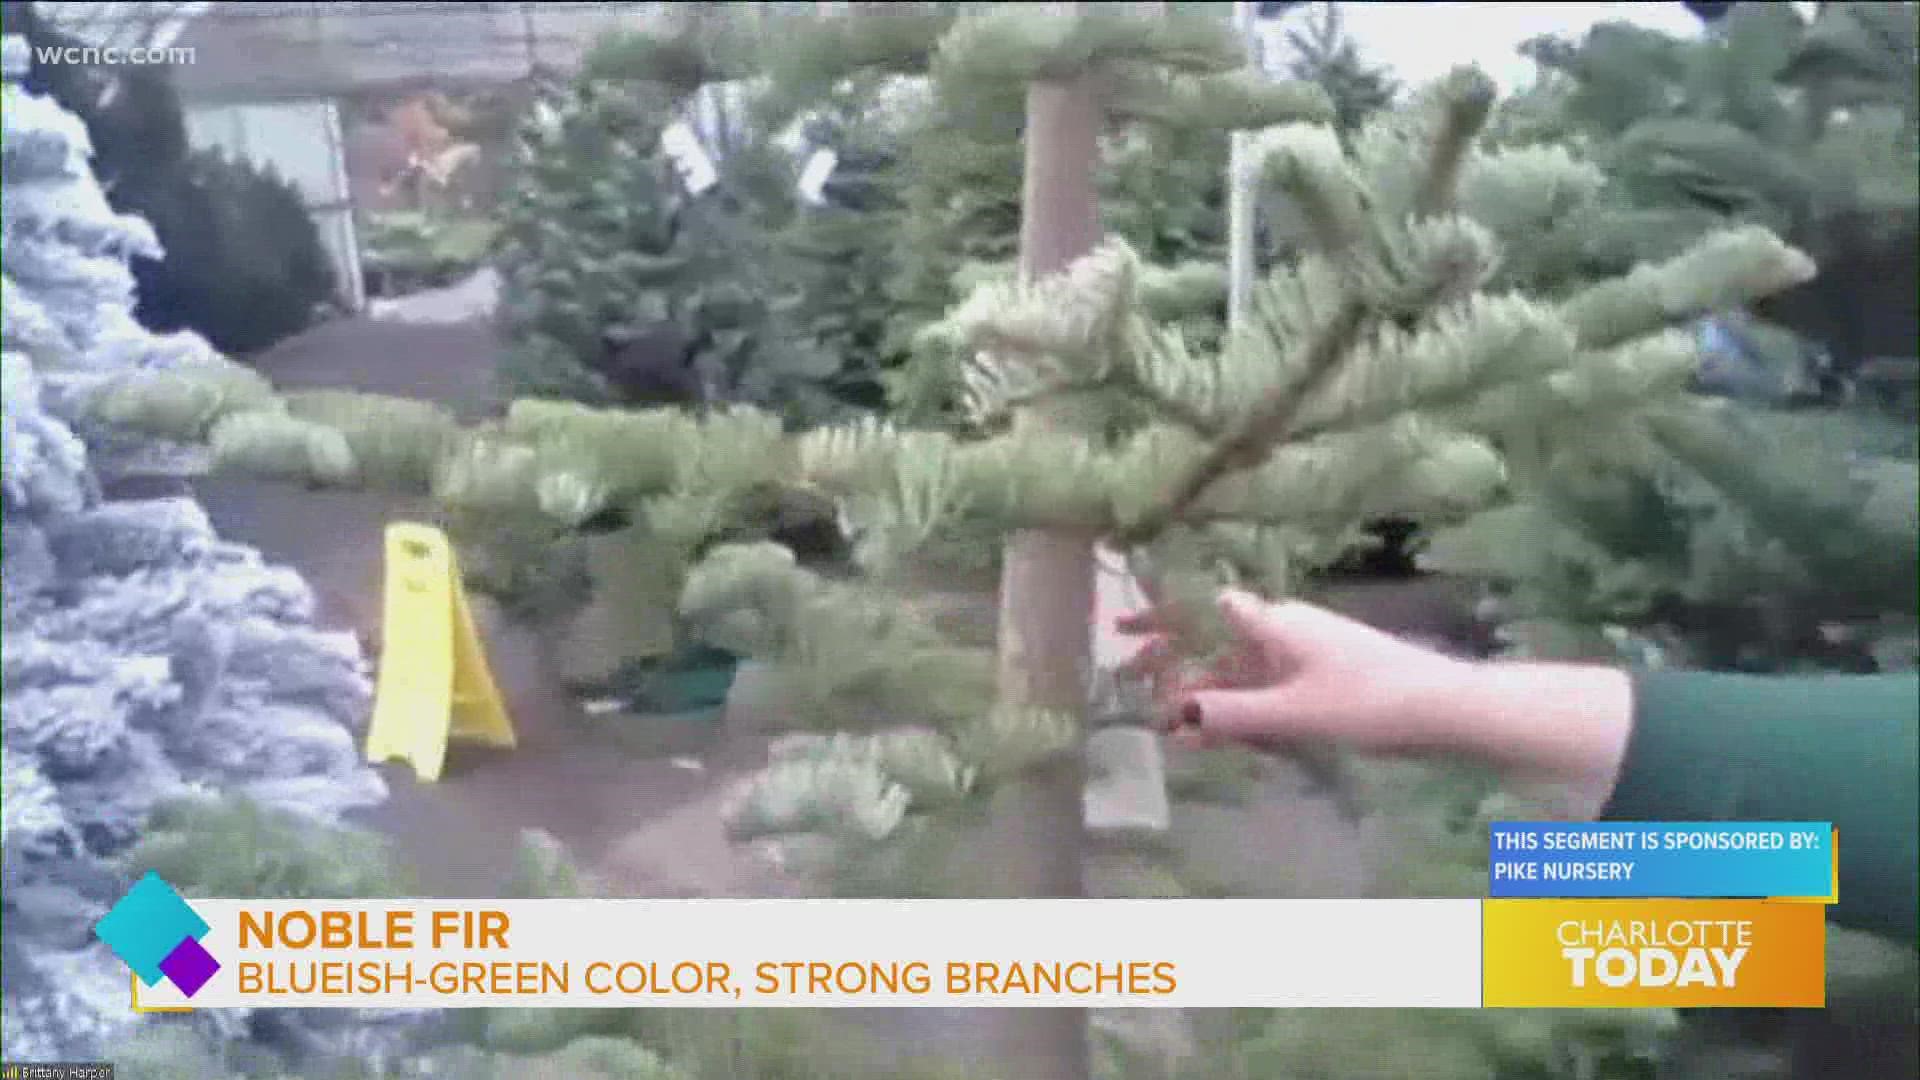 Pike Nursery also shares ways to care for your tree